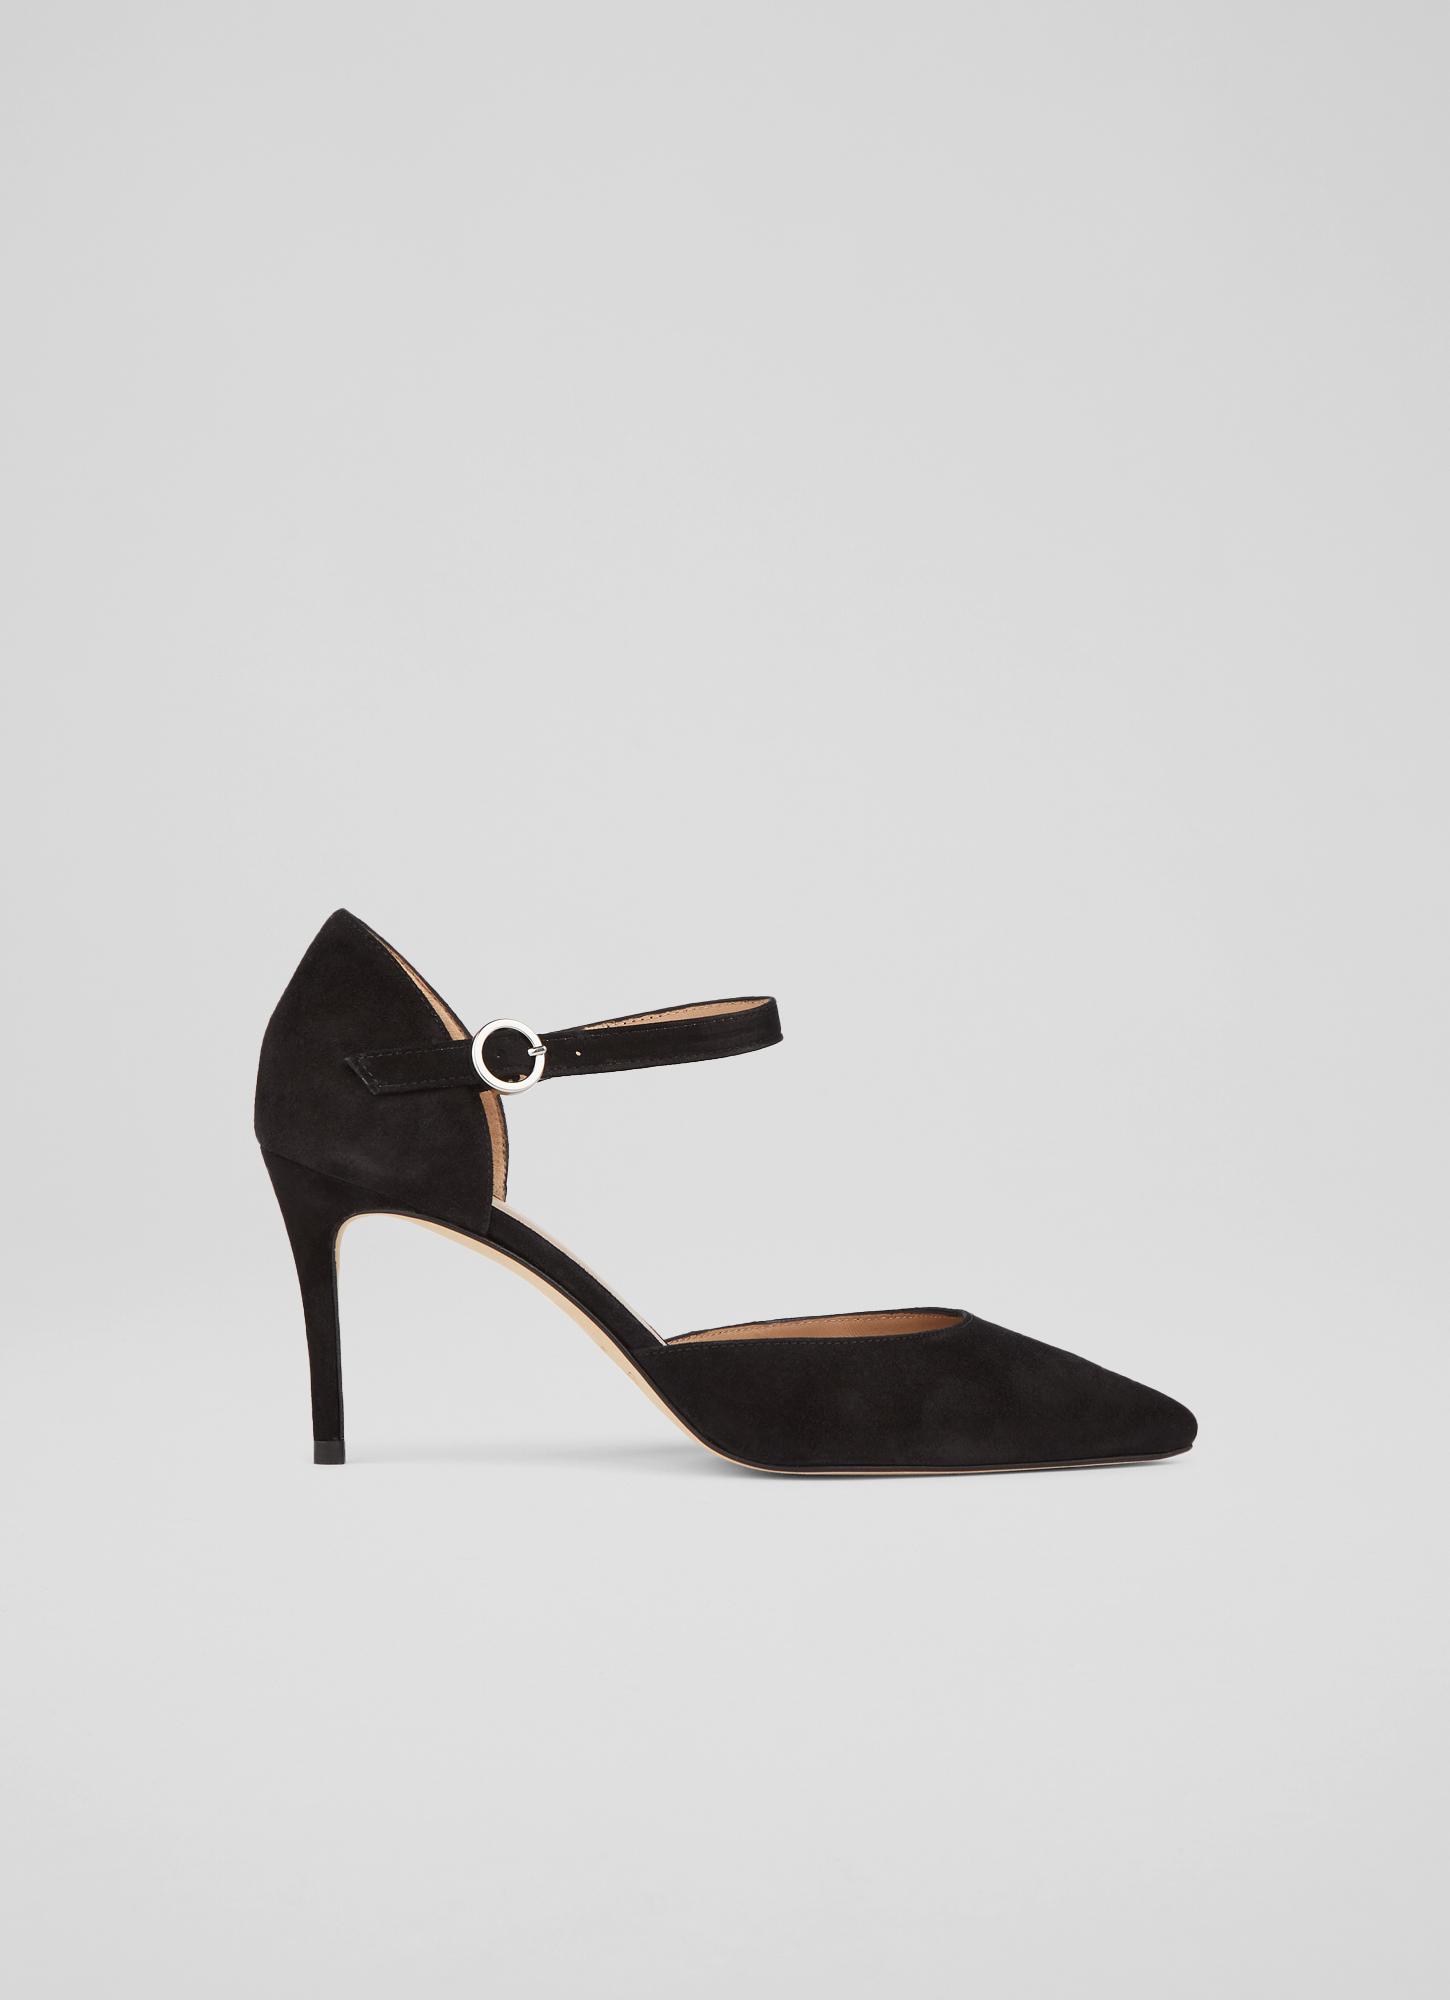 MICHAEL KORS women shoes Alina Pump black suede with India | Ubuy